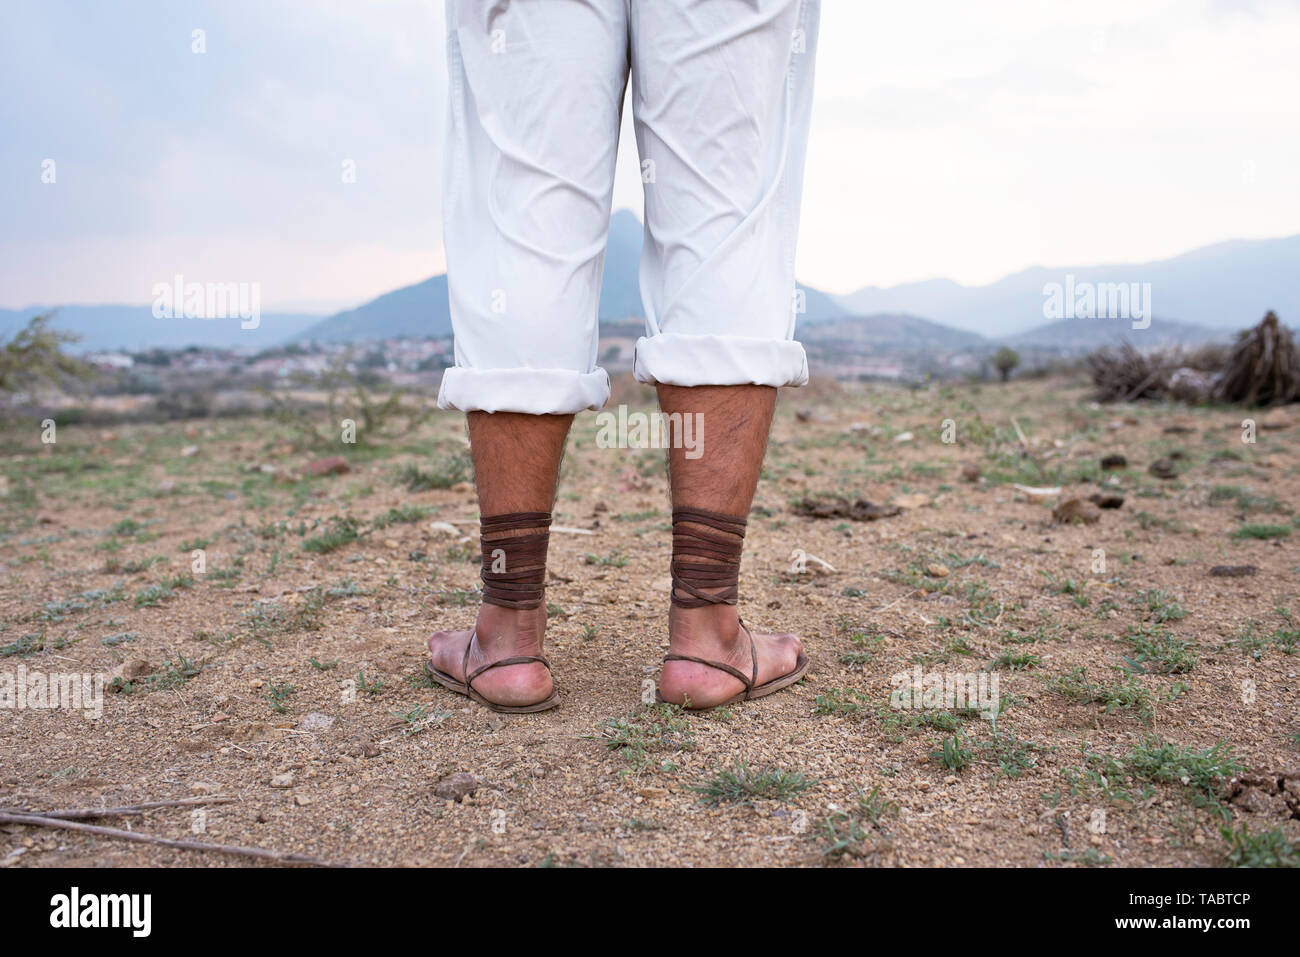 Man from behind standing on dry ground wearing white pants / trousers and ancient, gladiator style lace up sandals. RF outdoor concept. Oaxaca, Mexico Stock Photo